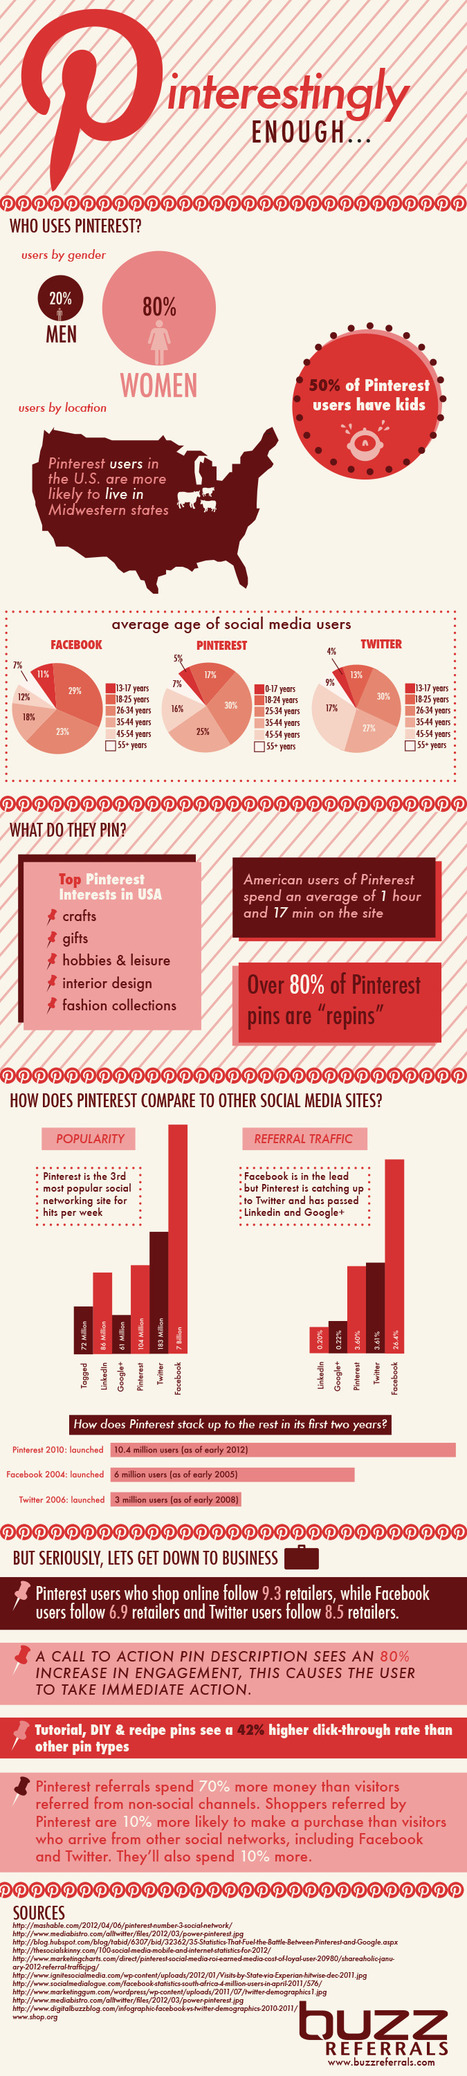 Social Media Infographic: Why Use Pinterest? | Latest Social Media News | Scoop.it